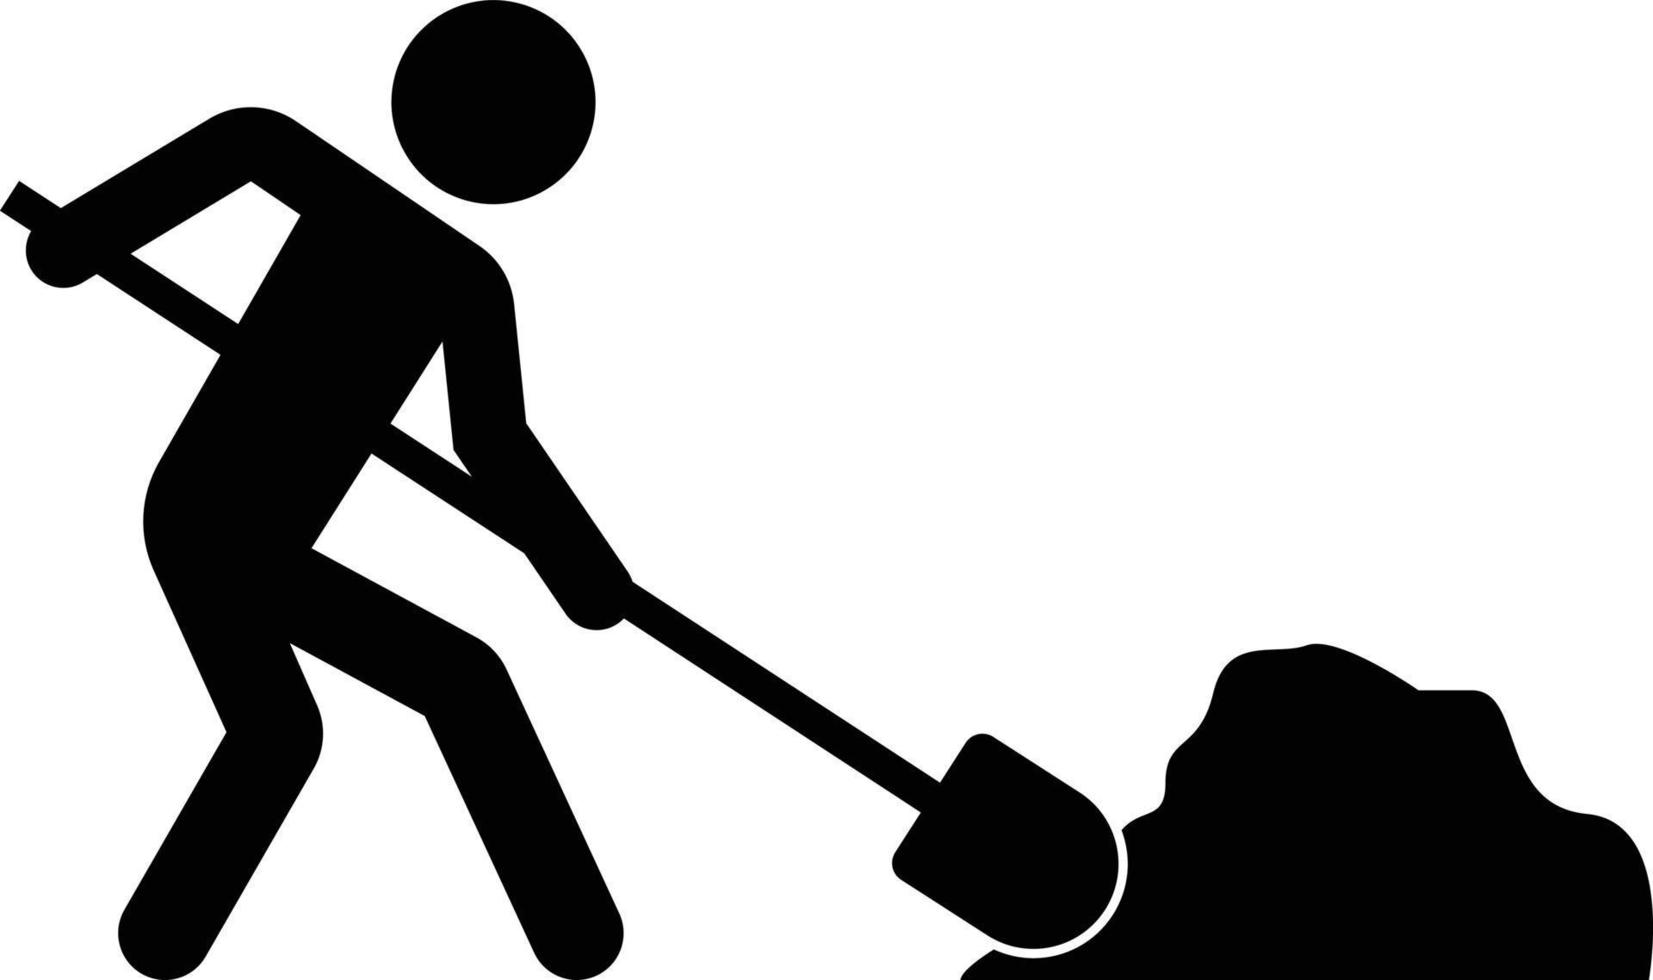 Man at Work or Labor Icon for Road works and Construction vector